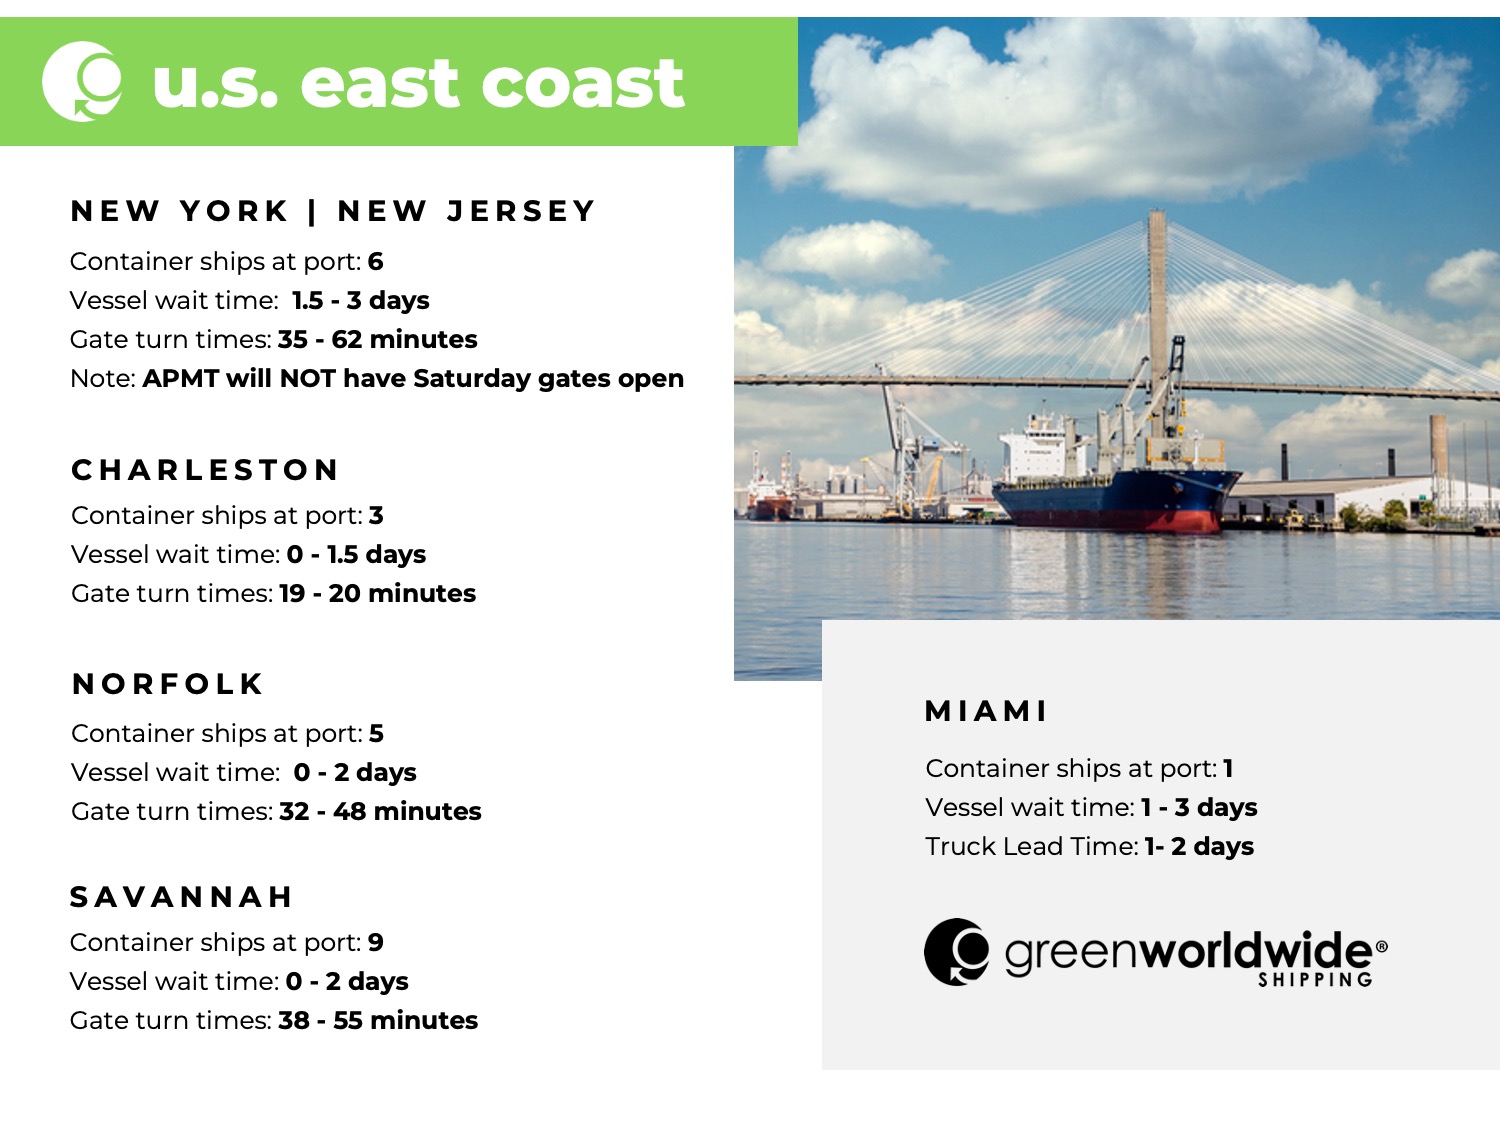 u.s. east coast NEW YORK | NEW JERSEY Container ships at port: 6 Vessel wait time: 1.5 - 3 days Gate turn times: 35 - 62 minutes Note: APMT will NOT have Saturday gates open CHARLESTON Container ships at port: 3 Vessel wait time: 0 - 1.5 days Gate turn times: 19 - 20 minutes NORFOLK Container ships at port: 5 Vessel wait time: 0 - 2 days Gate turn times: 32 - 48 minutes SAVANNAH Container ships at port: 9 Vessel wait time: 0 - 2 days Gate turn times: 38 - 55 minutes MIAMI Container ships at port: 1 Vessel wait time: 1 - 3 days Truck Lead Time: 1- 2 days